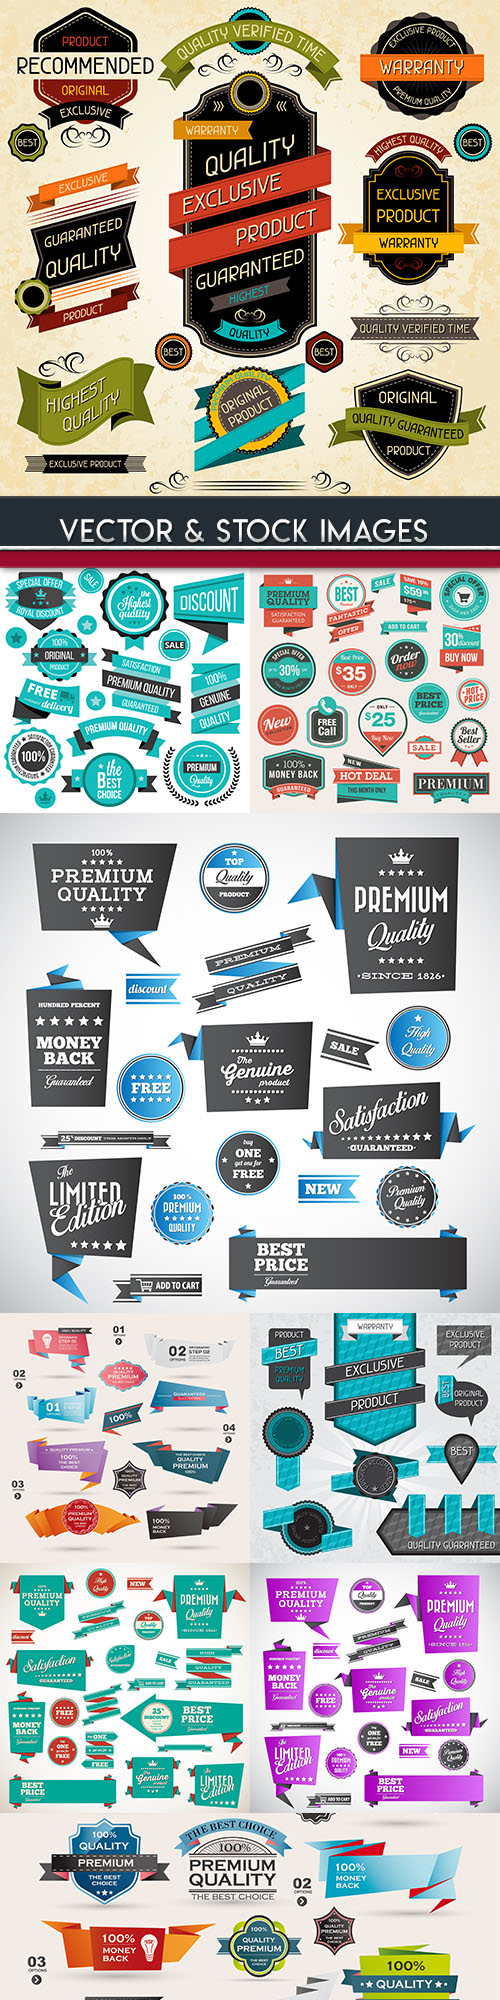 Premium quality golden badges and labels collection 28 